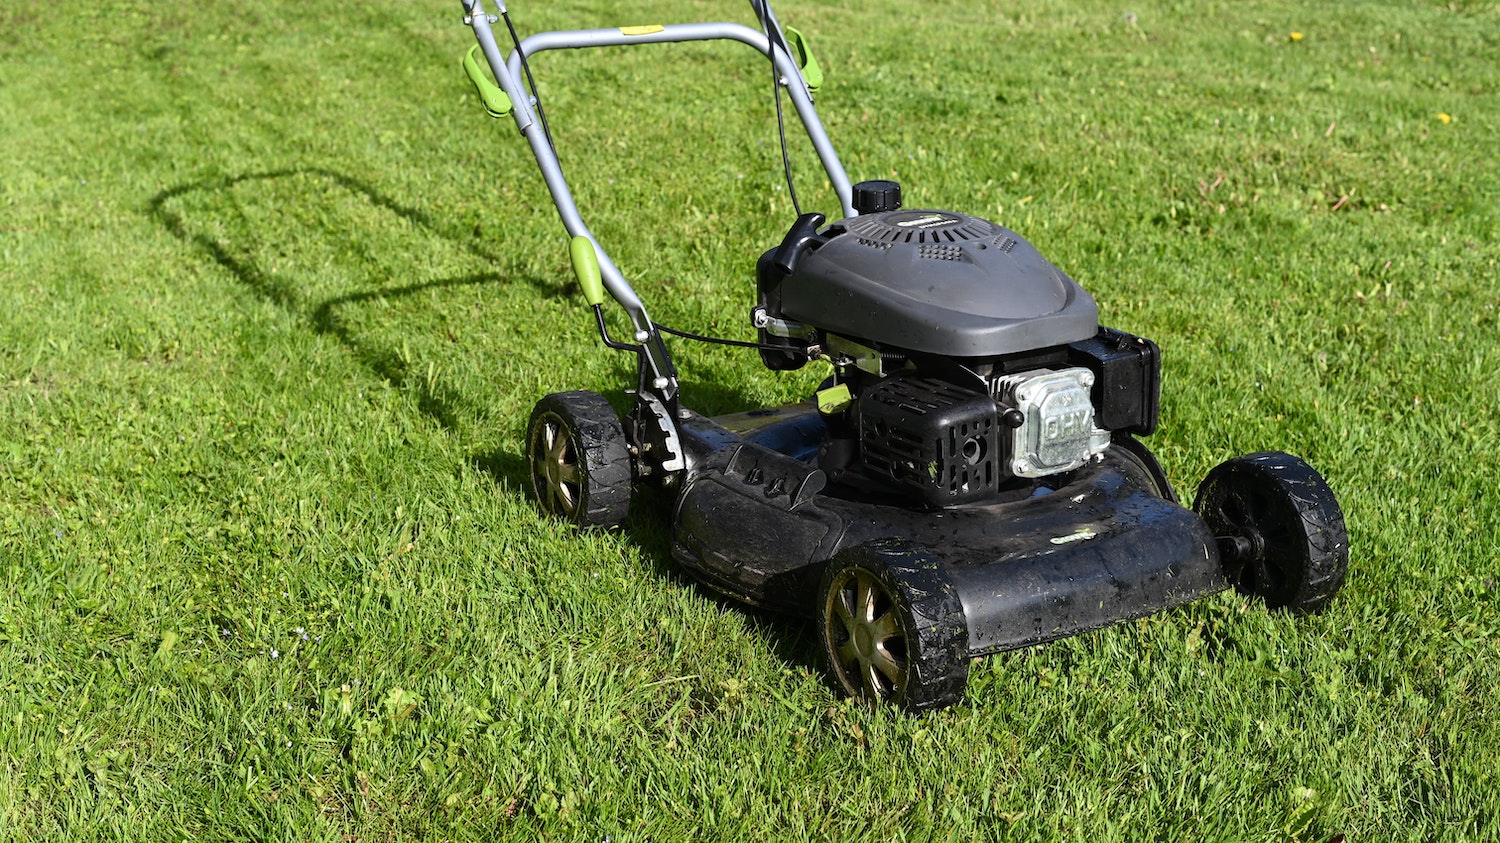 Heres How to Dispose of That Broken or Old Lawn Mower Taking up Space in Your Shed     